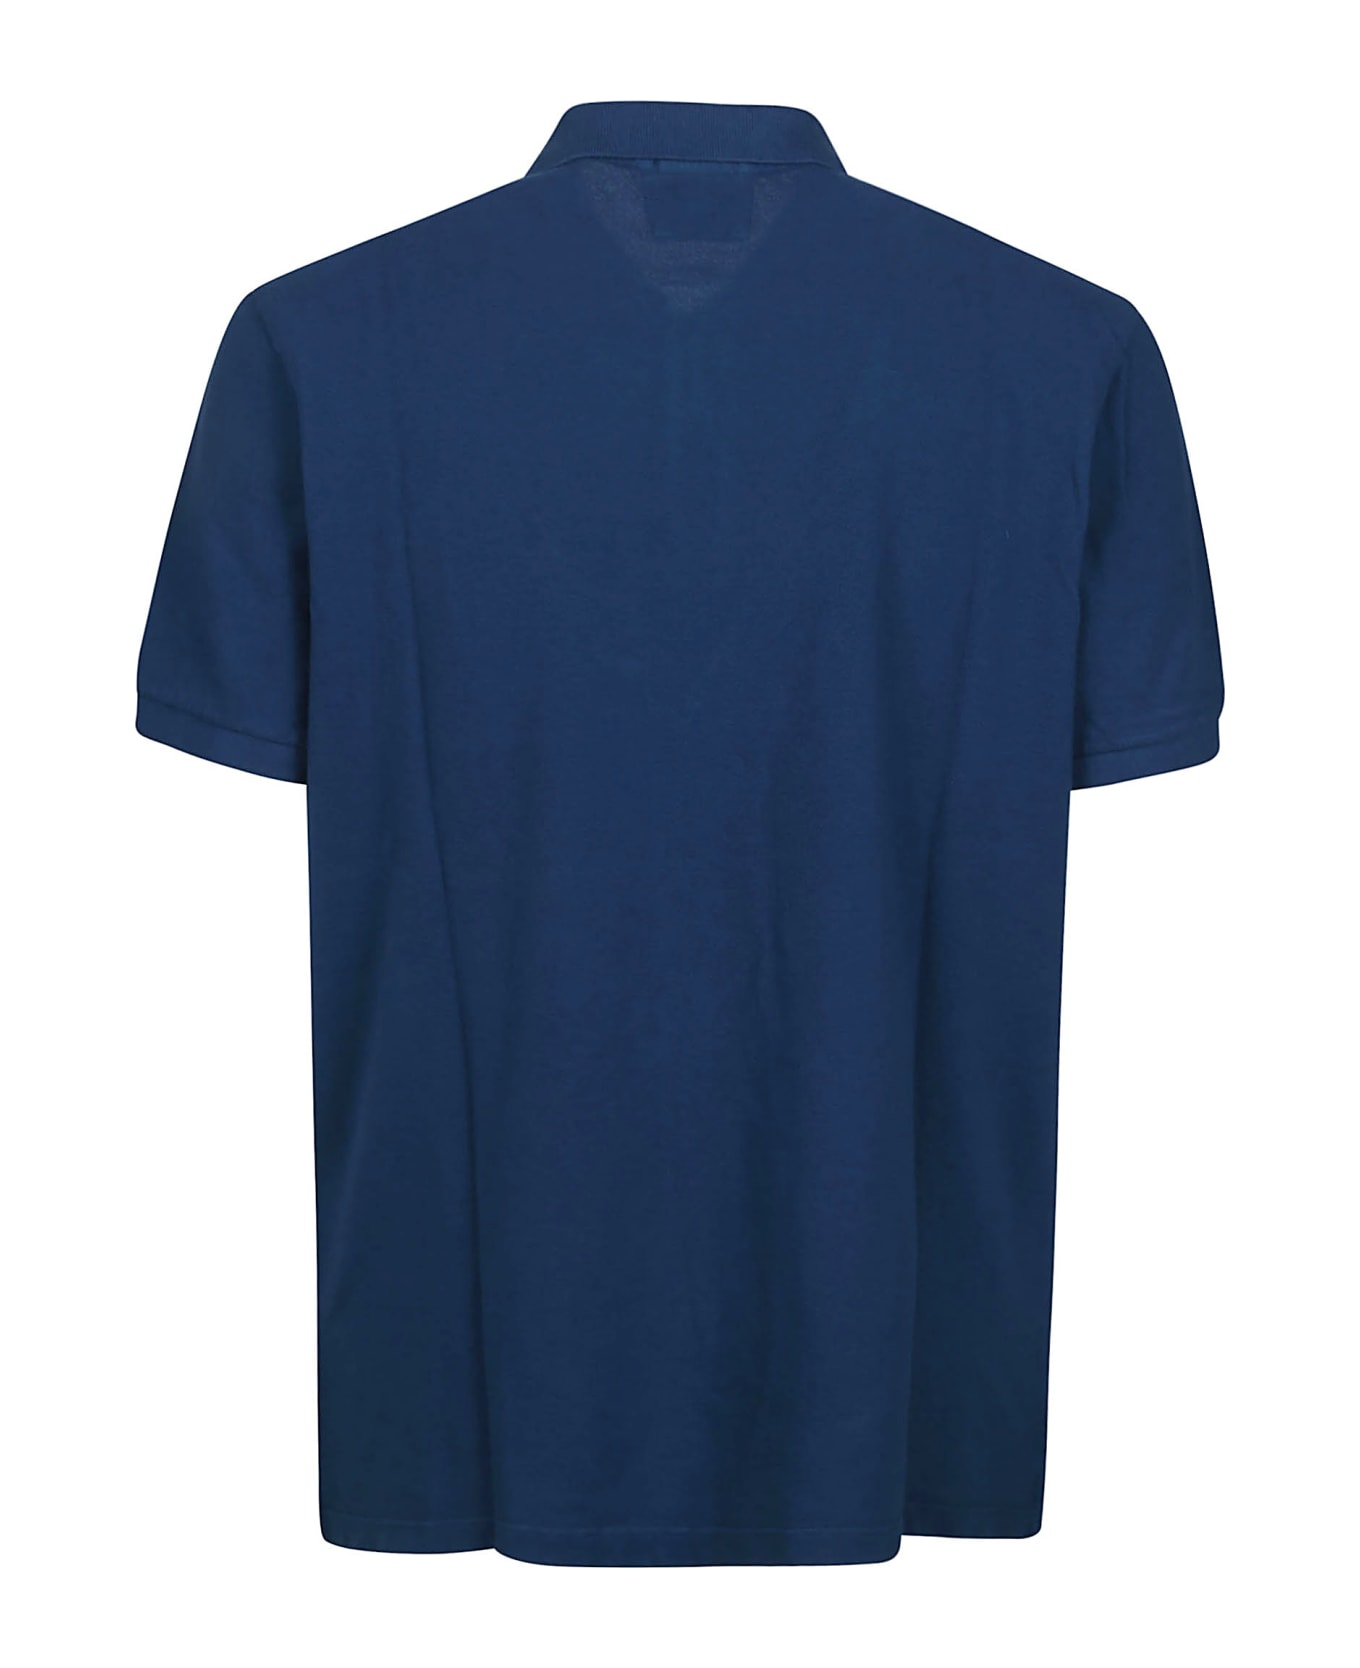 C.P. Company 24/1 Piquet Resist Dyed Short Sleeve Polo Shirt - Ink Blue ポロシャツ